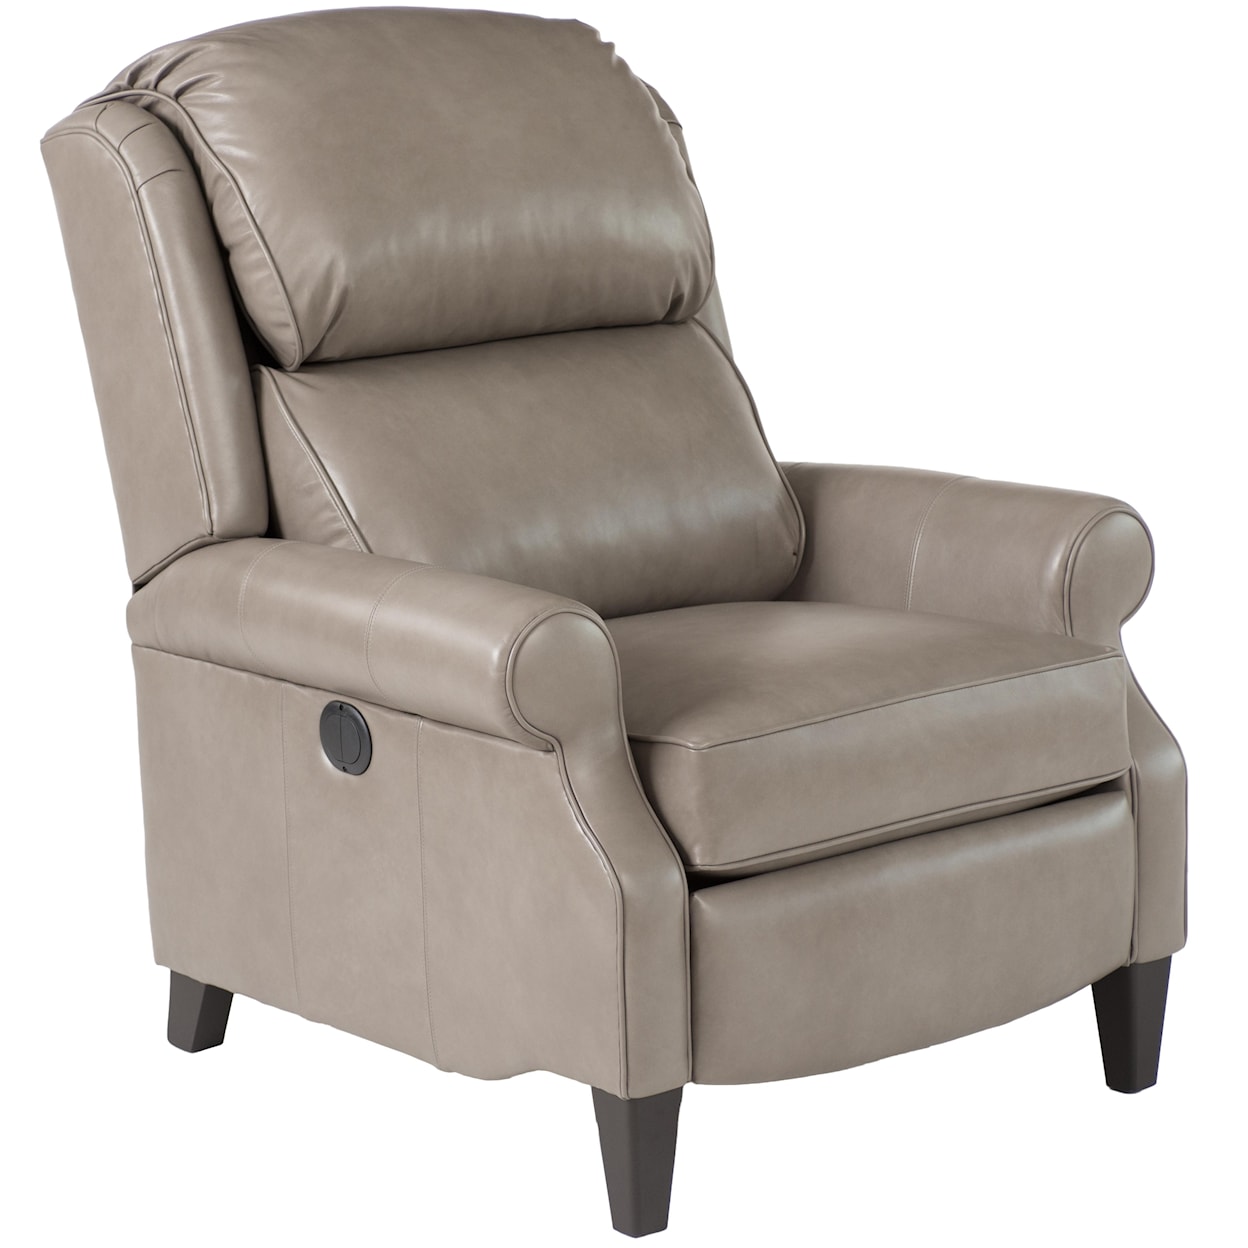 Smith Brothers Smith Brothers Traditional B/T Pressback Reclining Chair